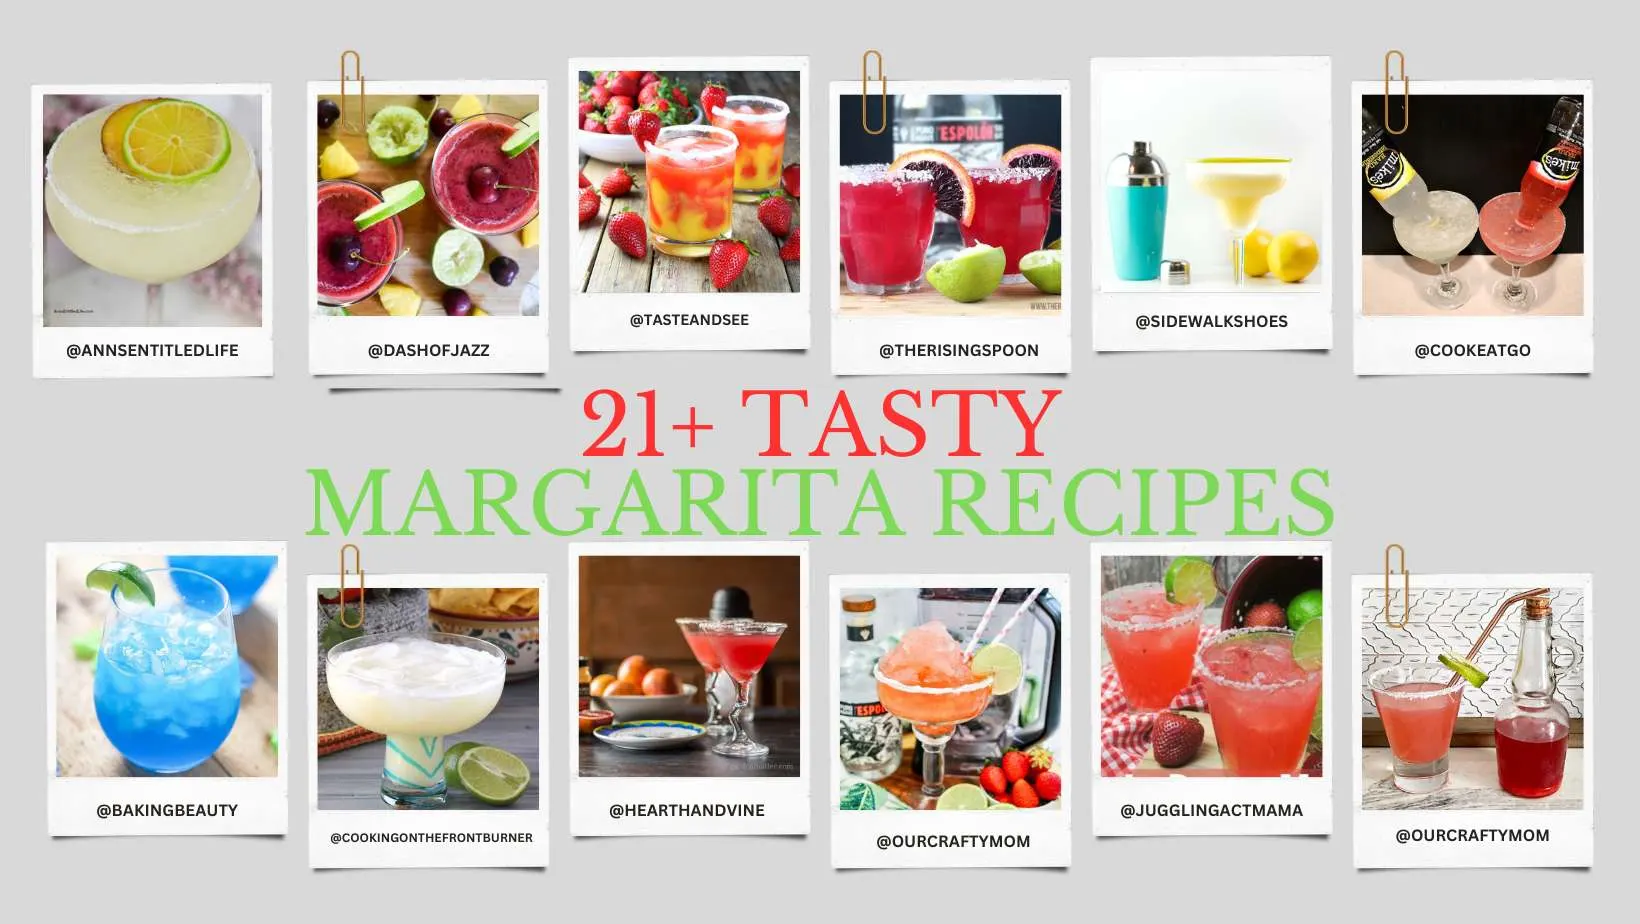 margarita recipes with 12 images and text overlay.